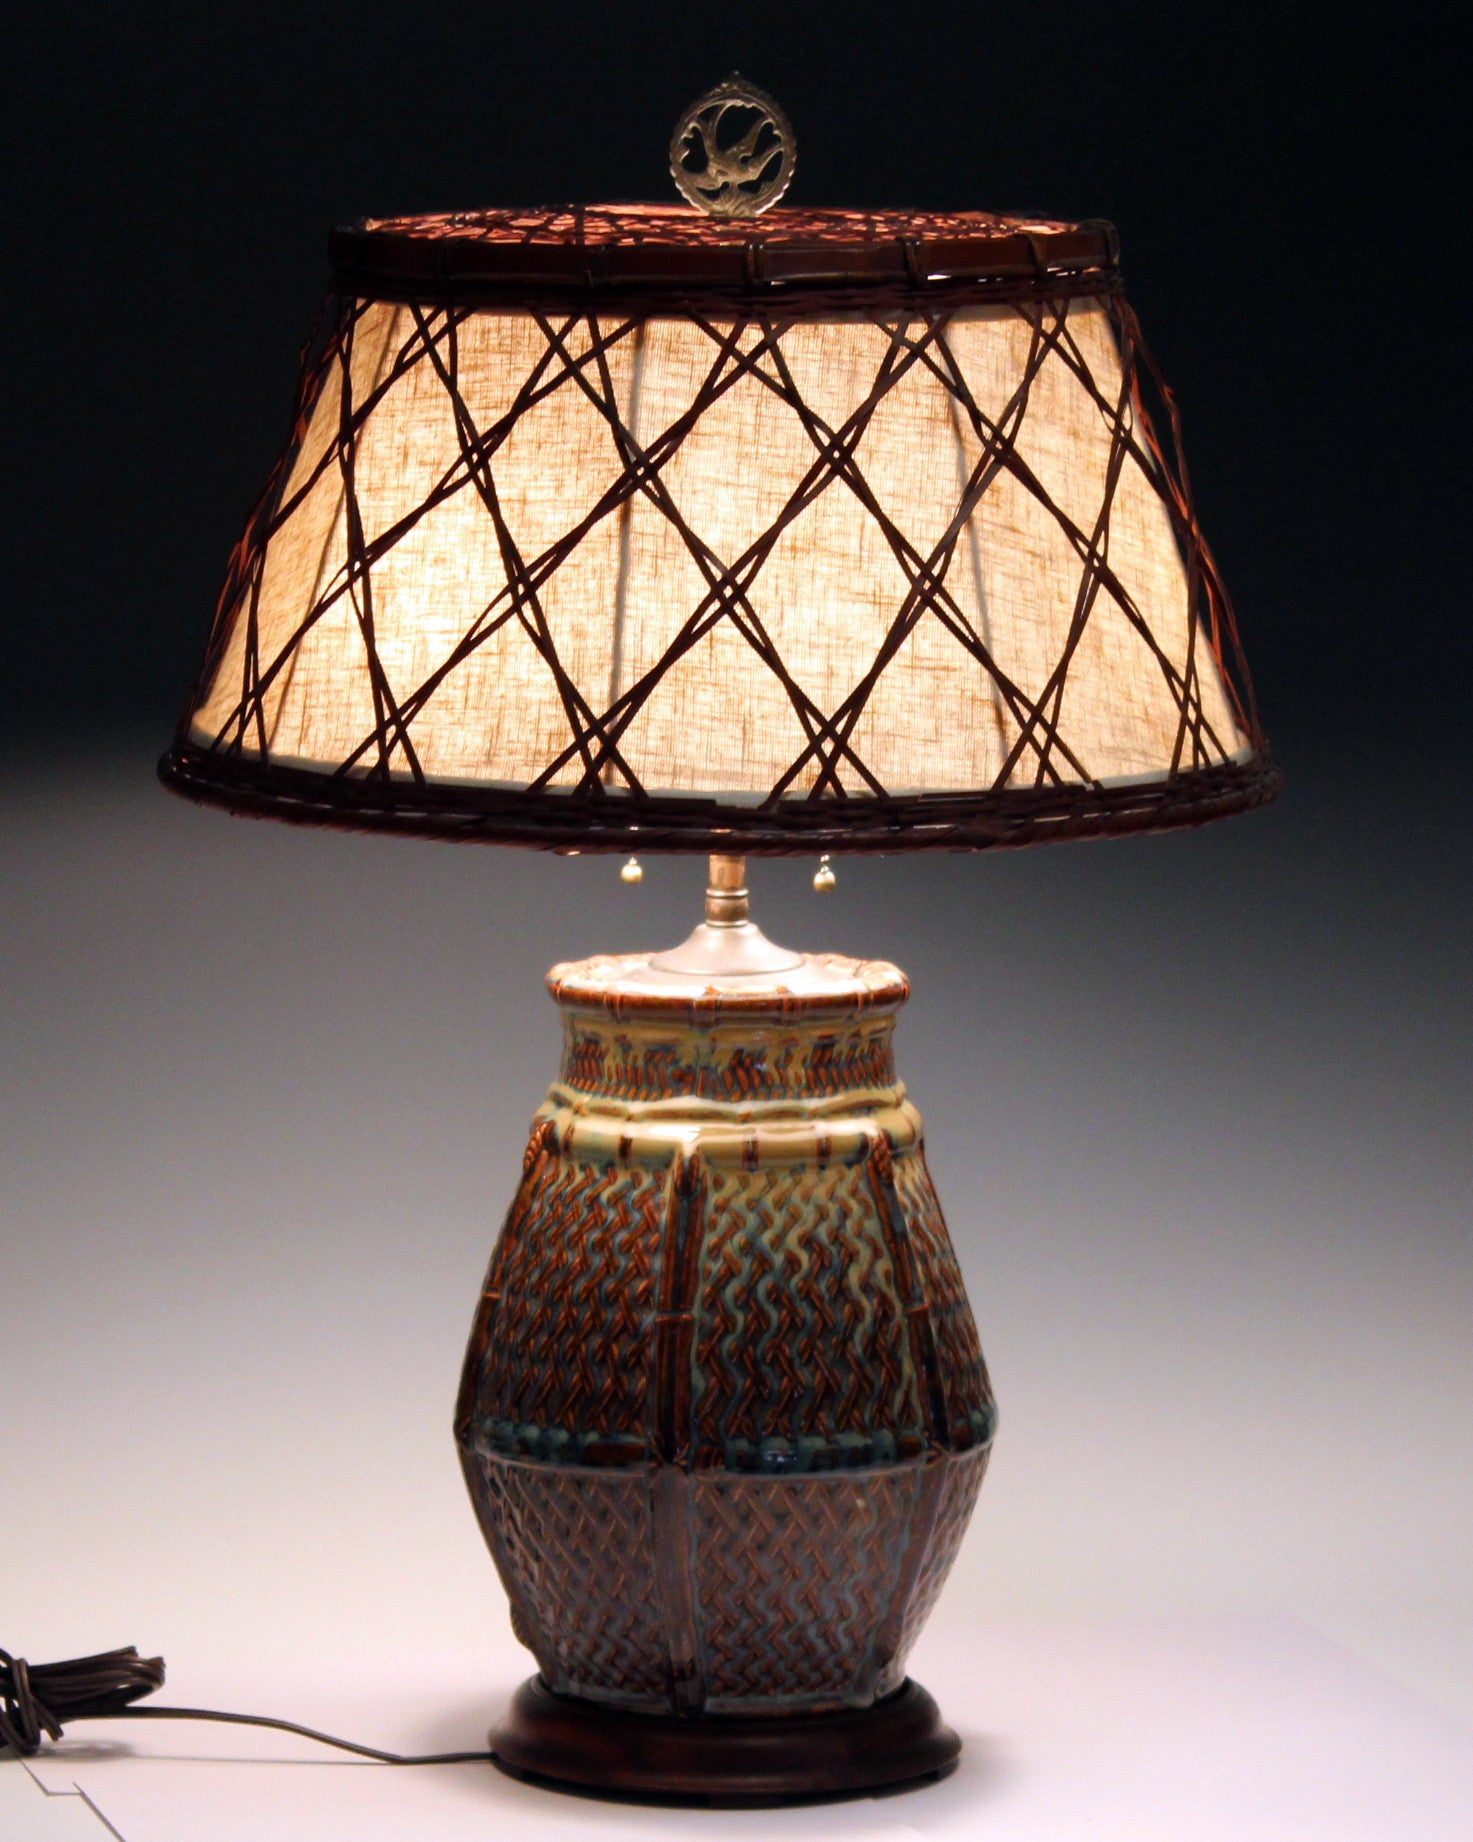 Antique Japanese Art Pottery Lamp with Period Woven Bamboo Shade